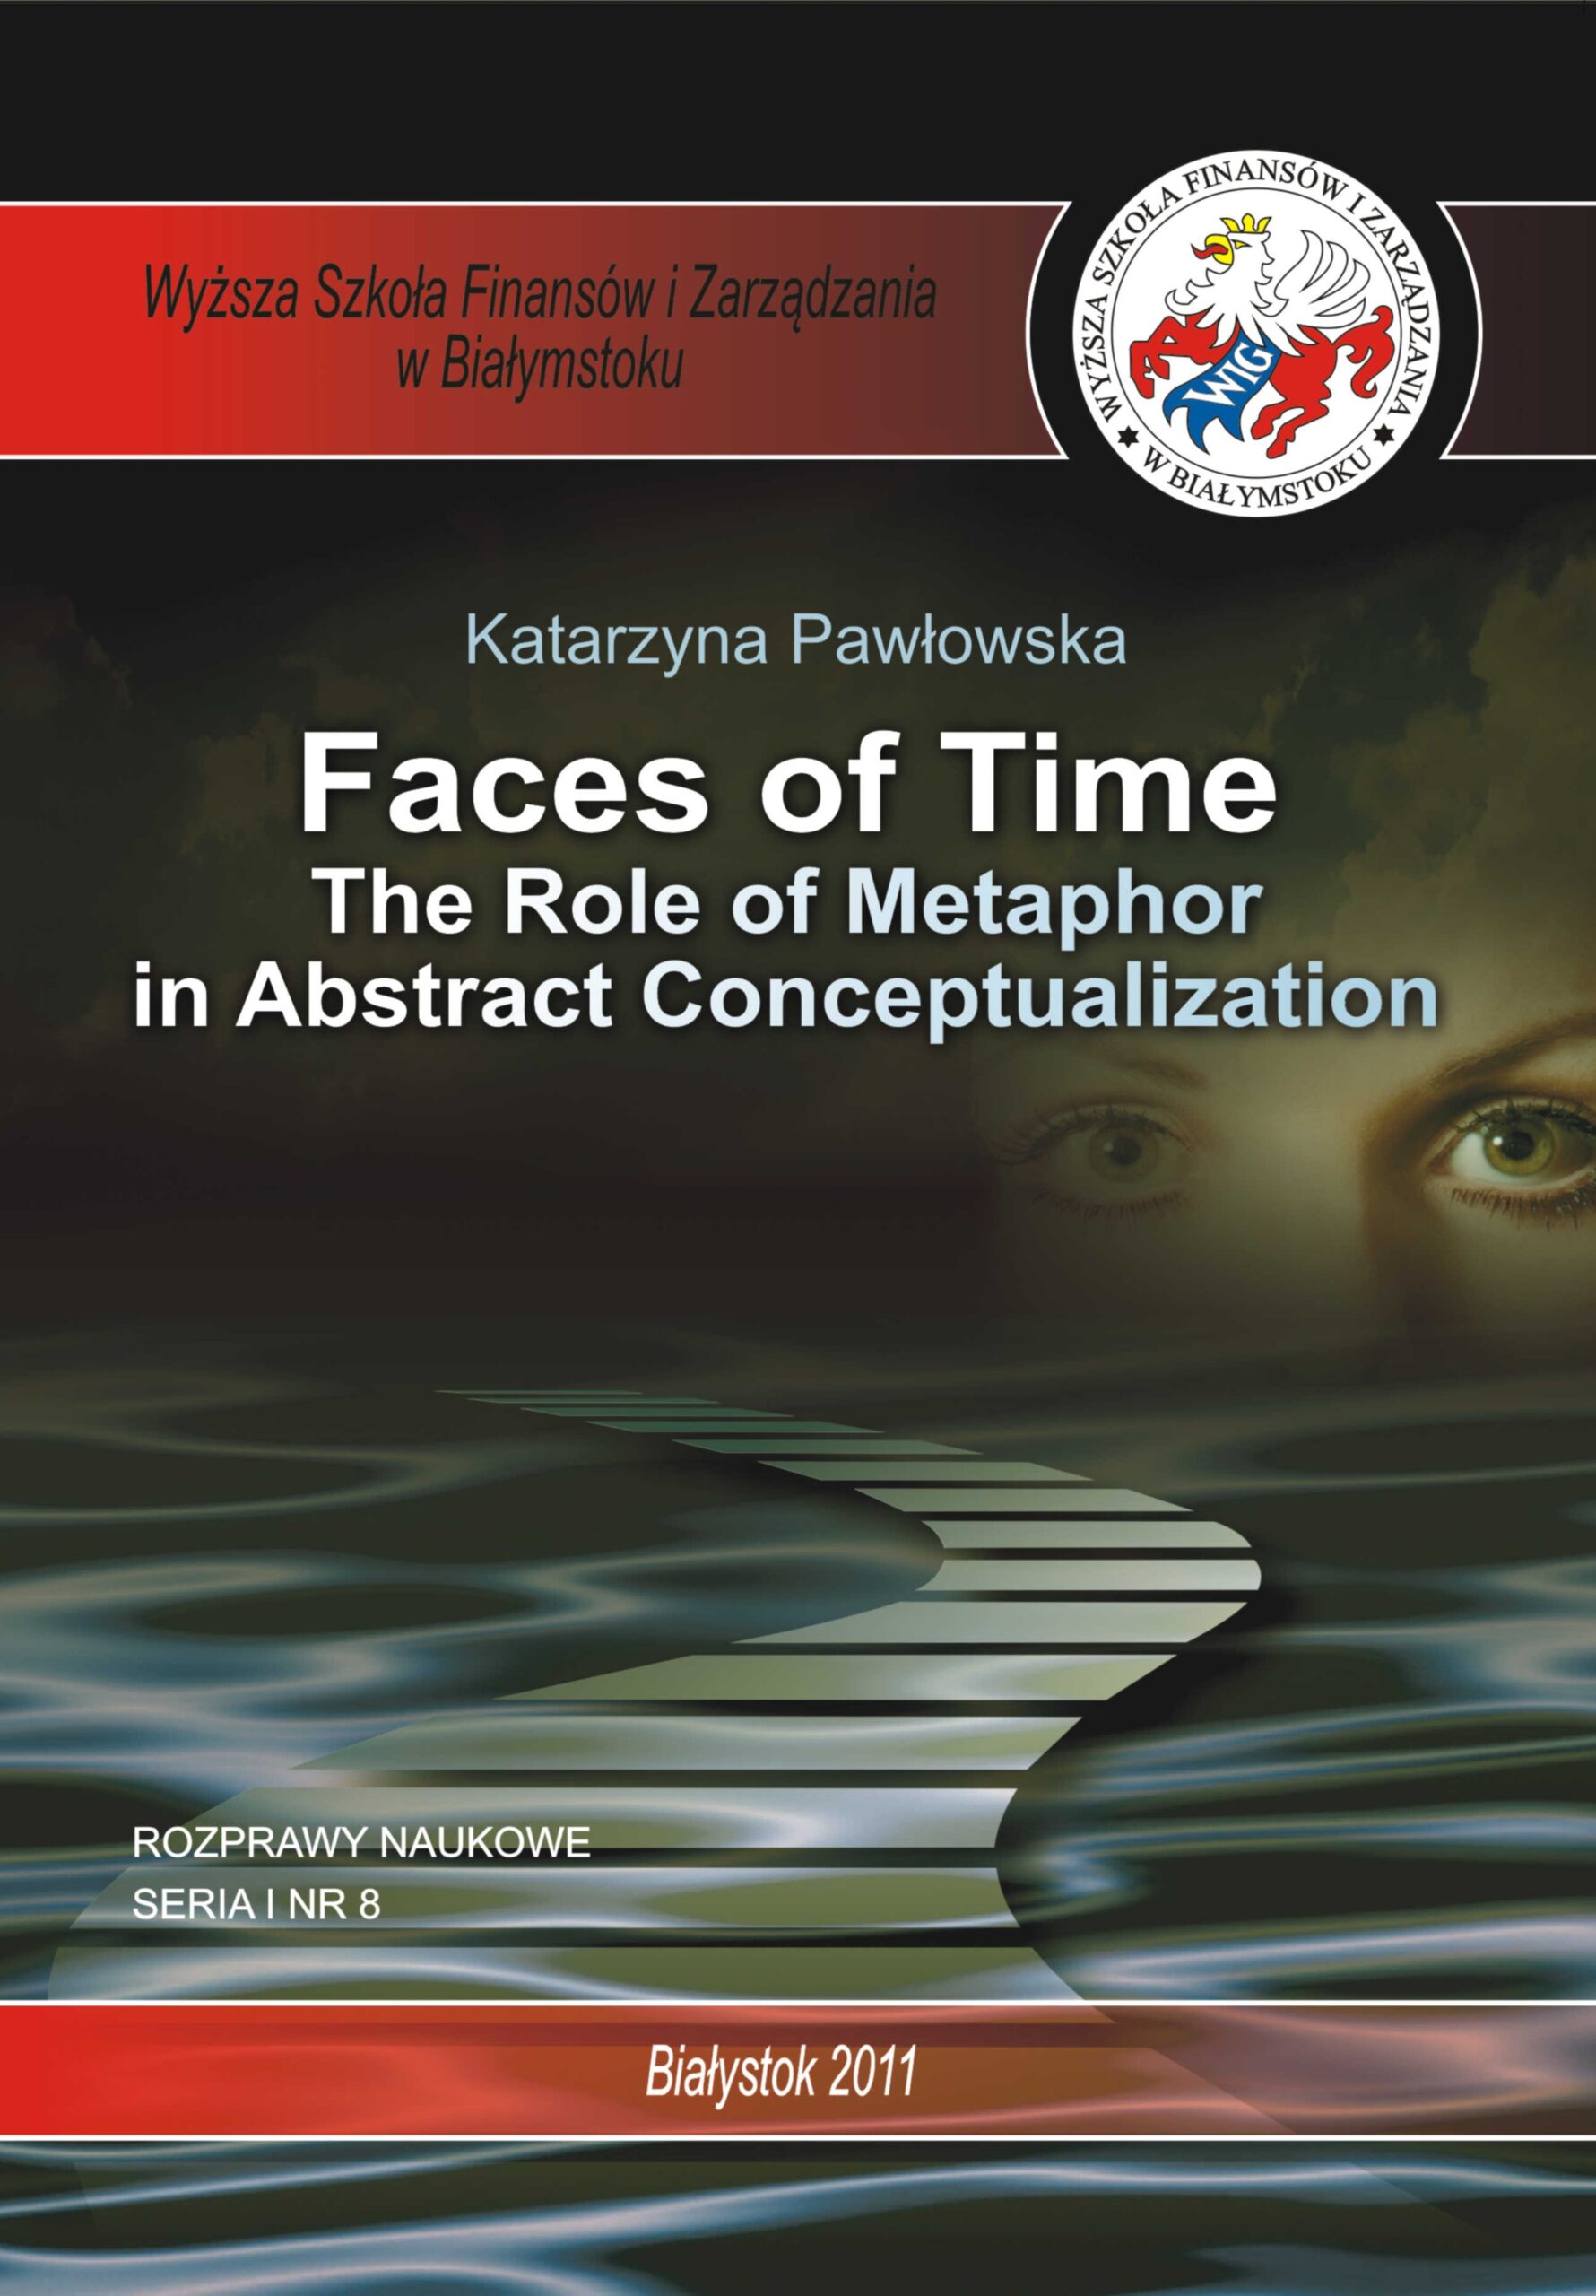 Faces of Time. The Role of Metaphor in Abstract Conceptualization